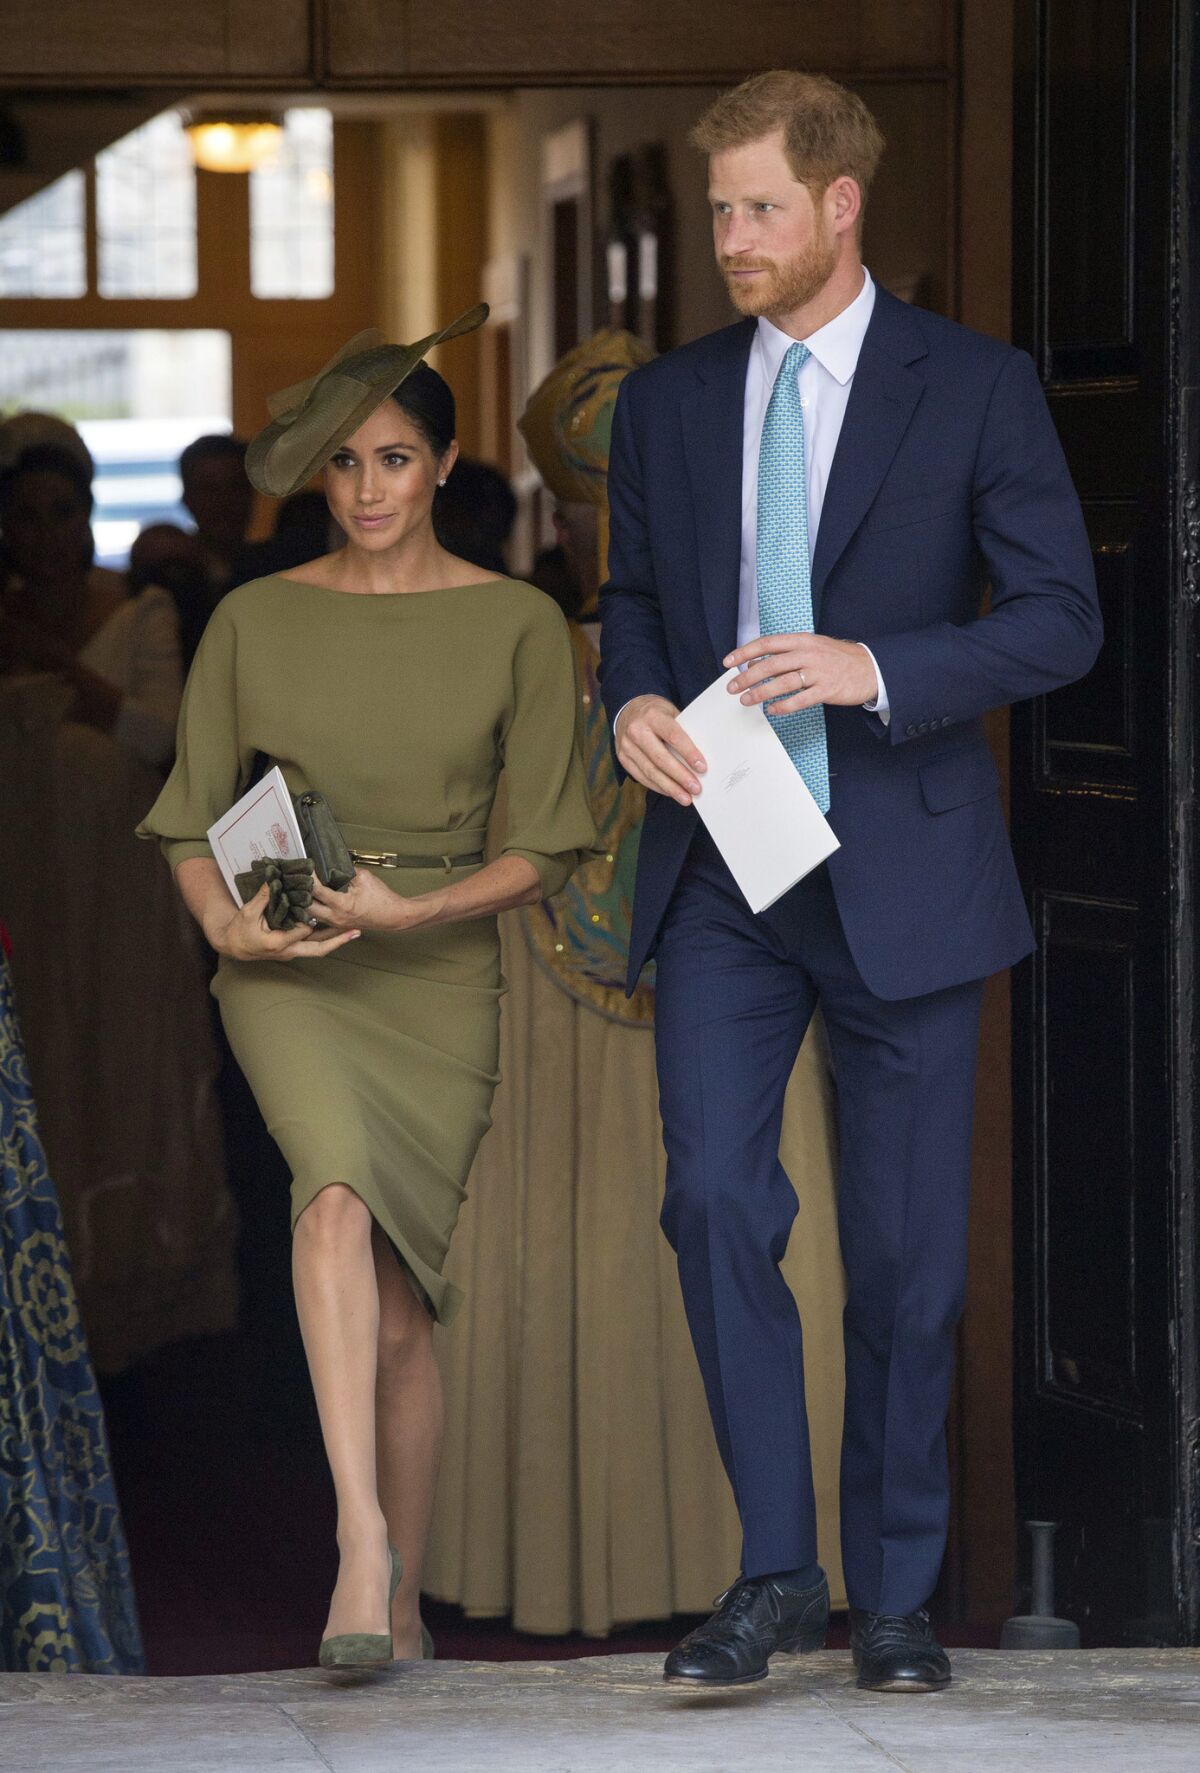 Britain's Prince Harry and Meghan, Duchess of Sussex leave after attending the christening service of Prince Louis at the Chapel Royal, St. James' Palace, London, Monday, July 9, 2018.